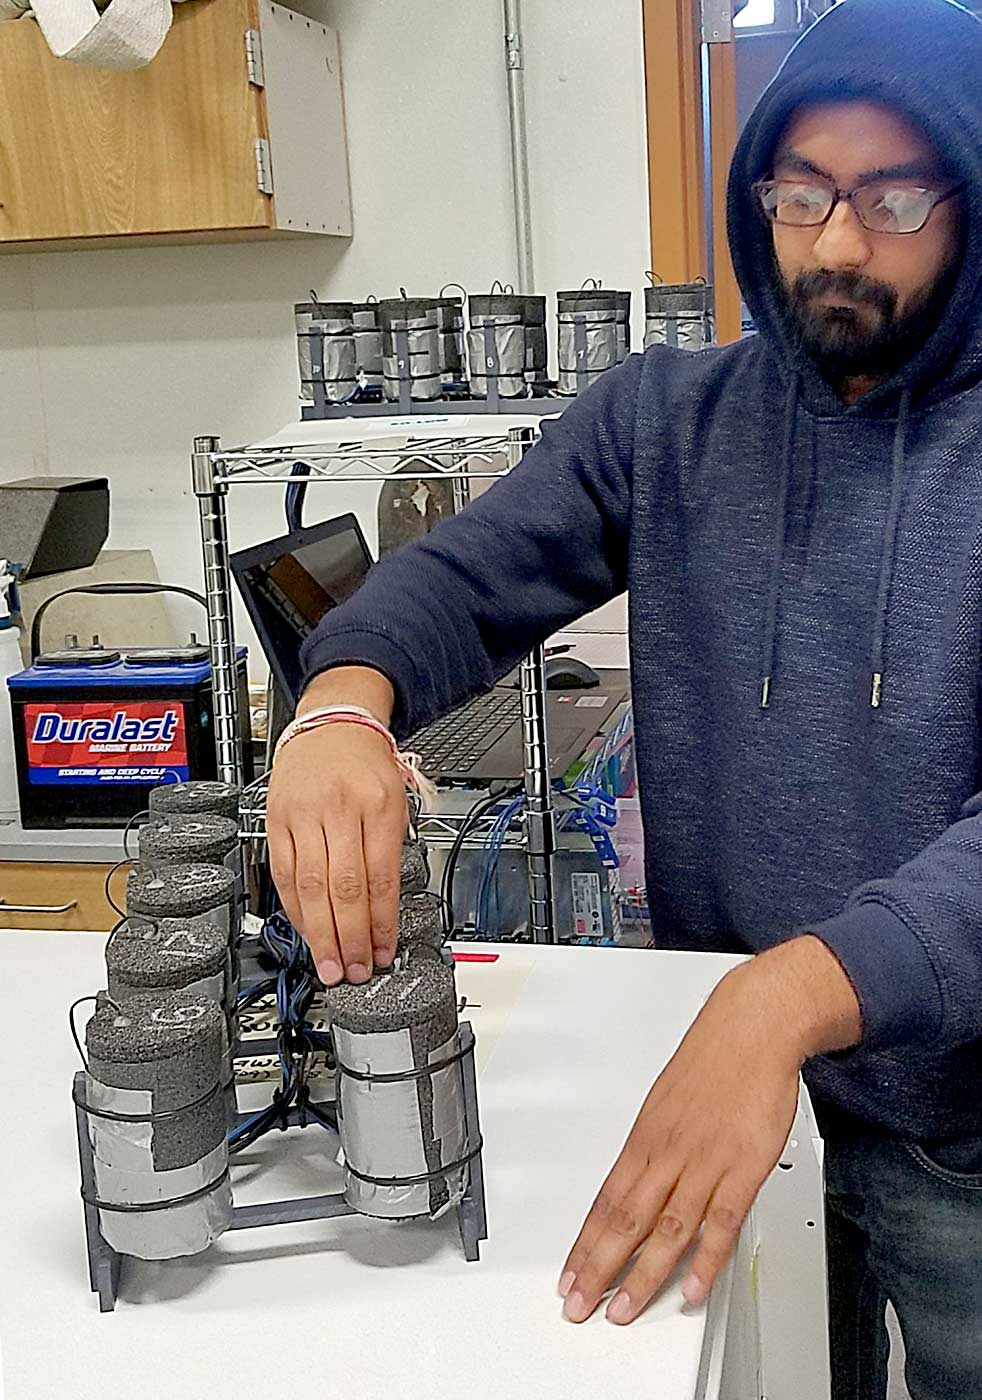 Amit Bhasin uses metal cups, or “polar pods,” to measure blueberry cold hardiness as part of the nutrition study at Washington State University’s Irrigated Agriculture Research and Extension Center in Prosser. (Courtesy Lisa DeVetter/Washington State University)